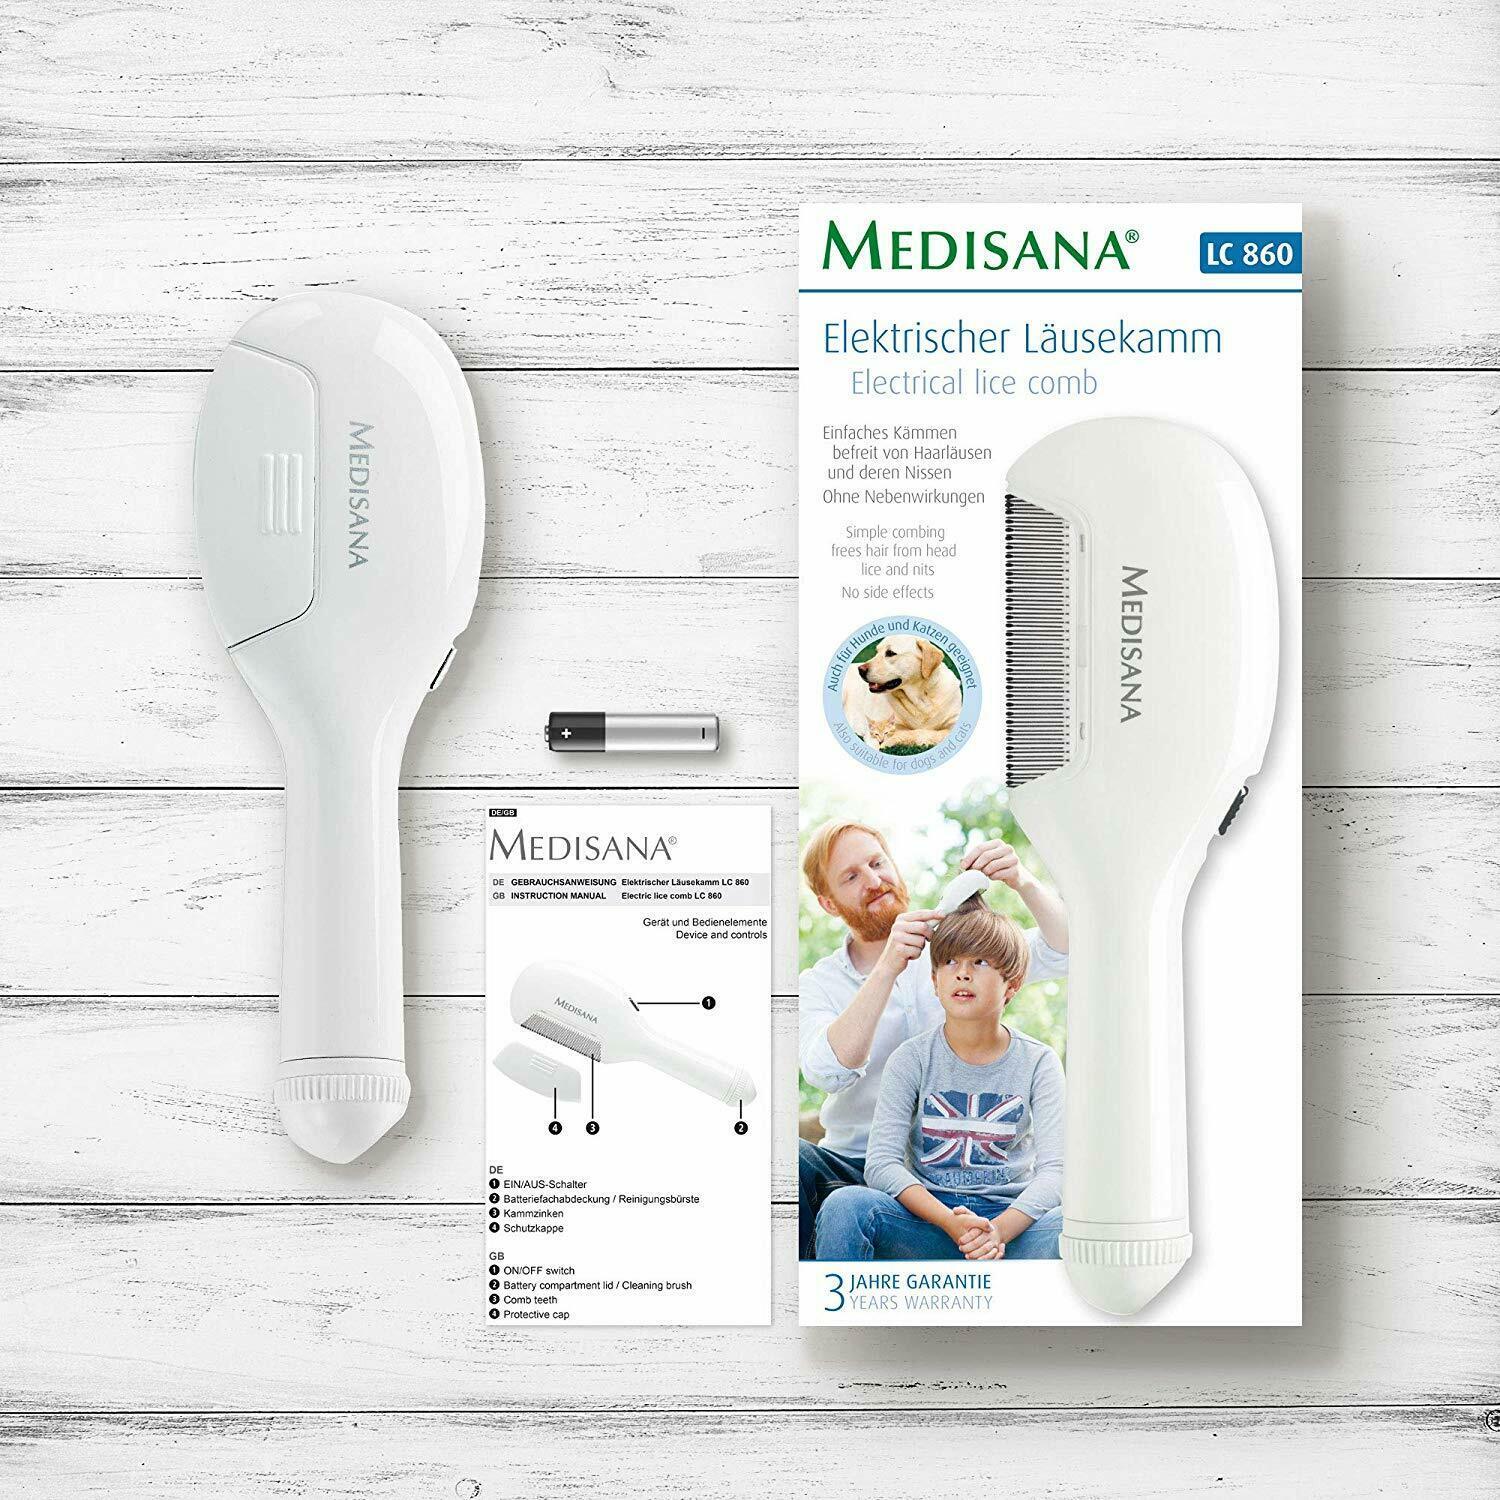 Medisana lcs 860 comb electric lice and nits also appropriate pets